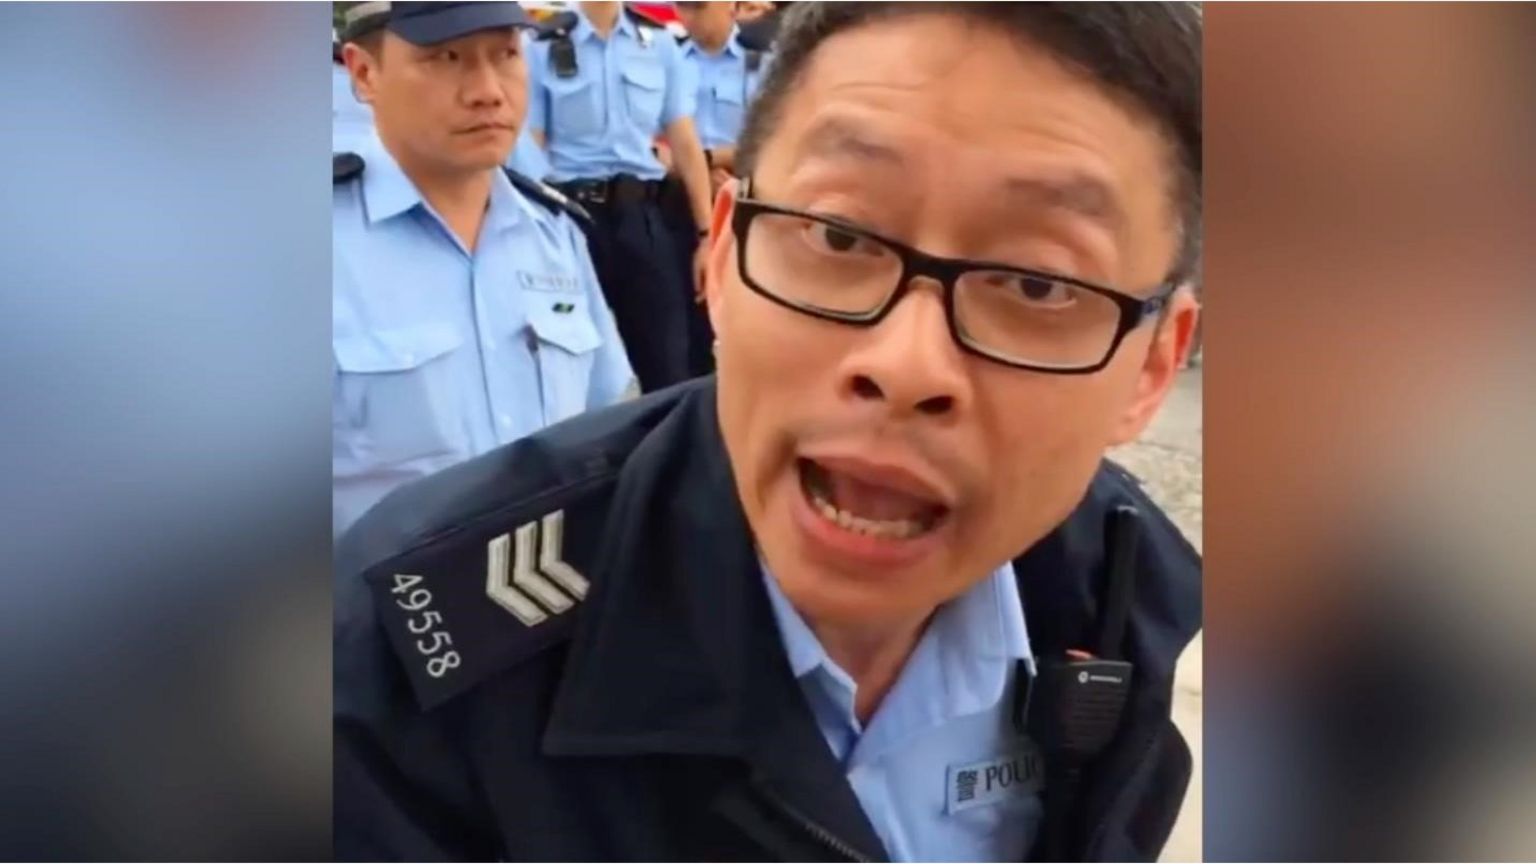 Policeman reading activist his rights before arrest